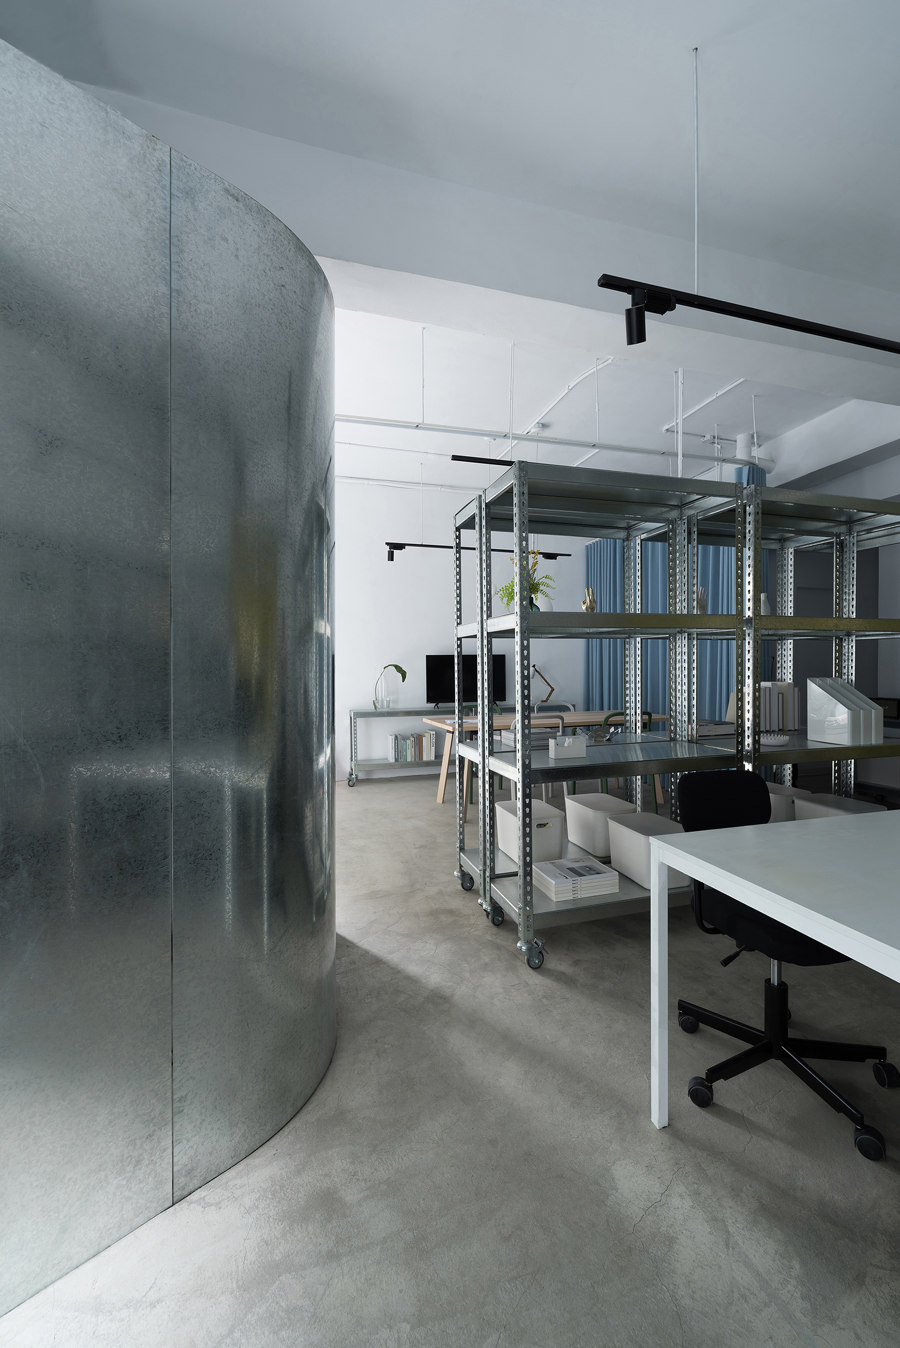 Possibility Lab by Gentleman Design Lab | Office facilities